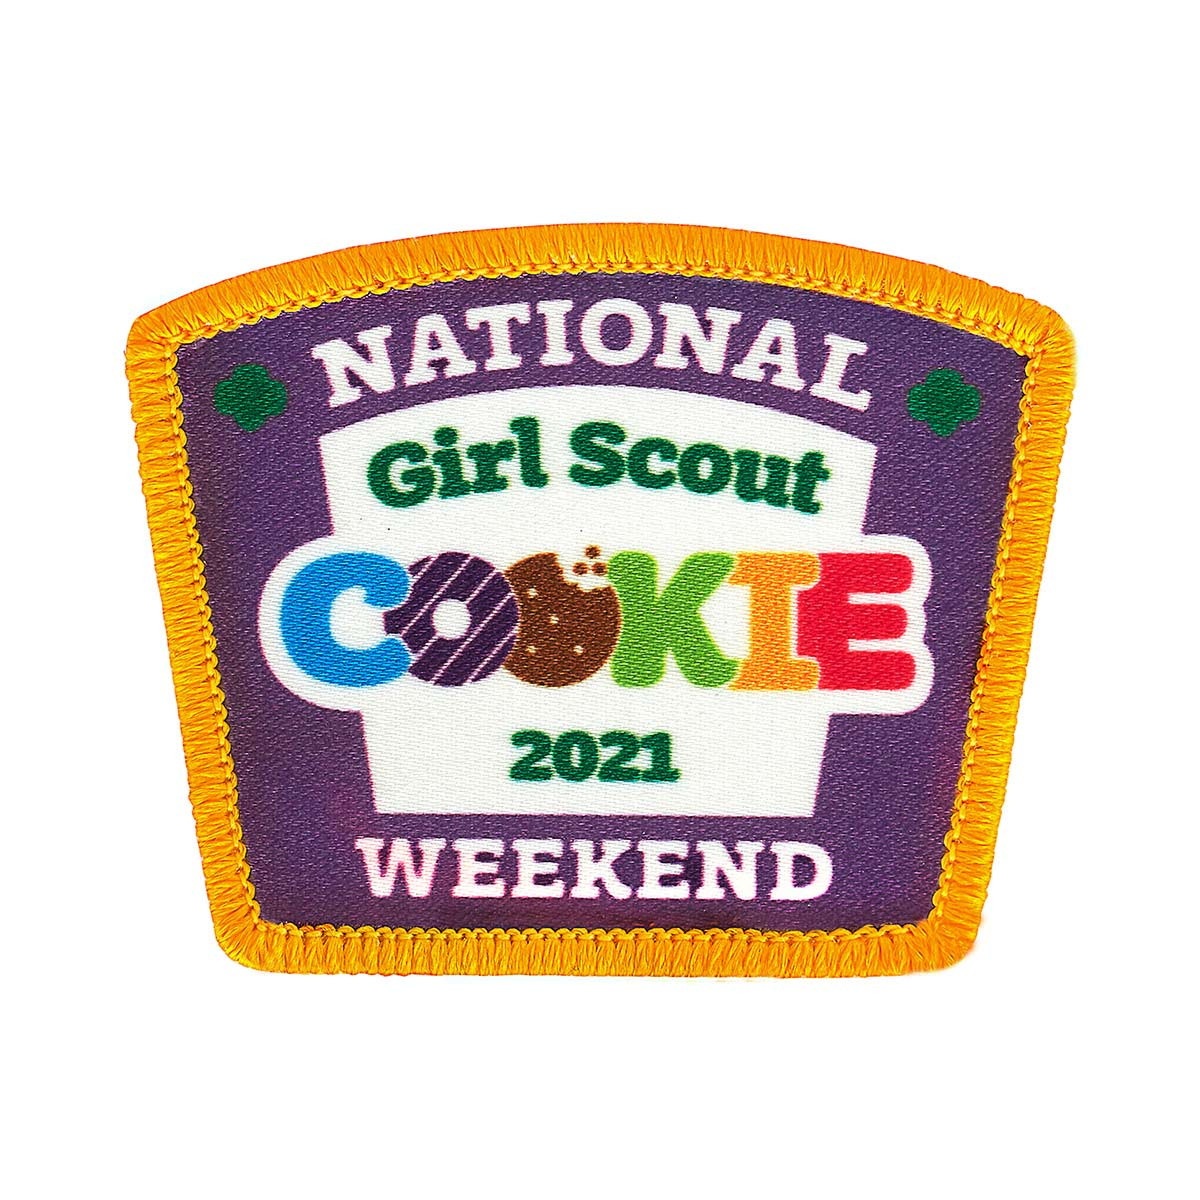 National Girl Scout Cookie Weekend 2021